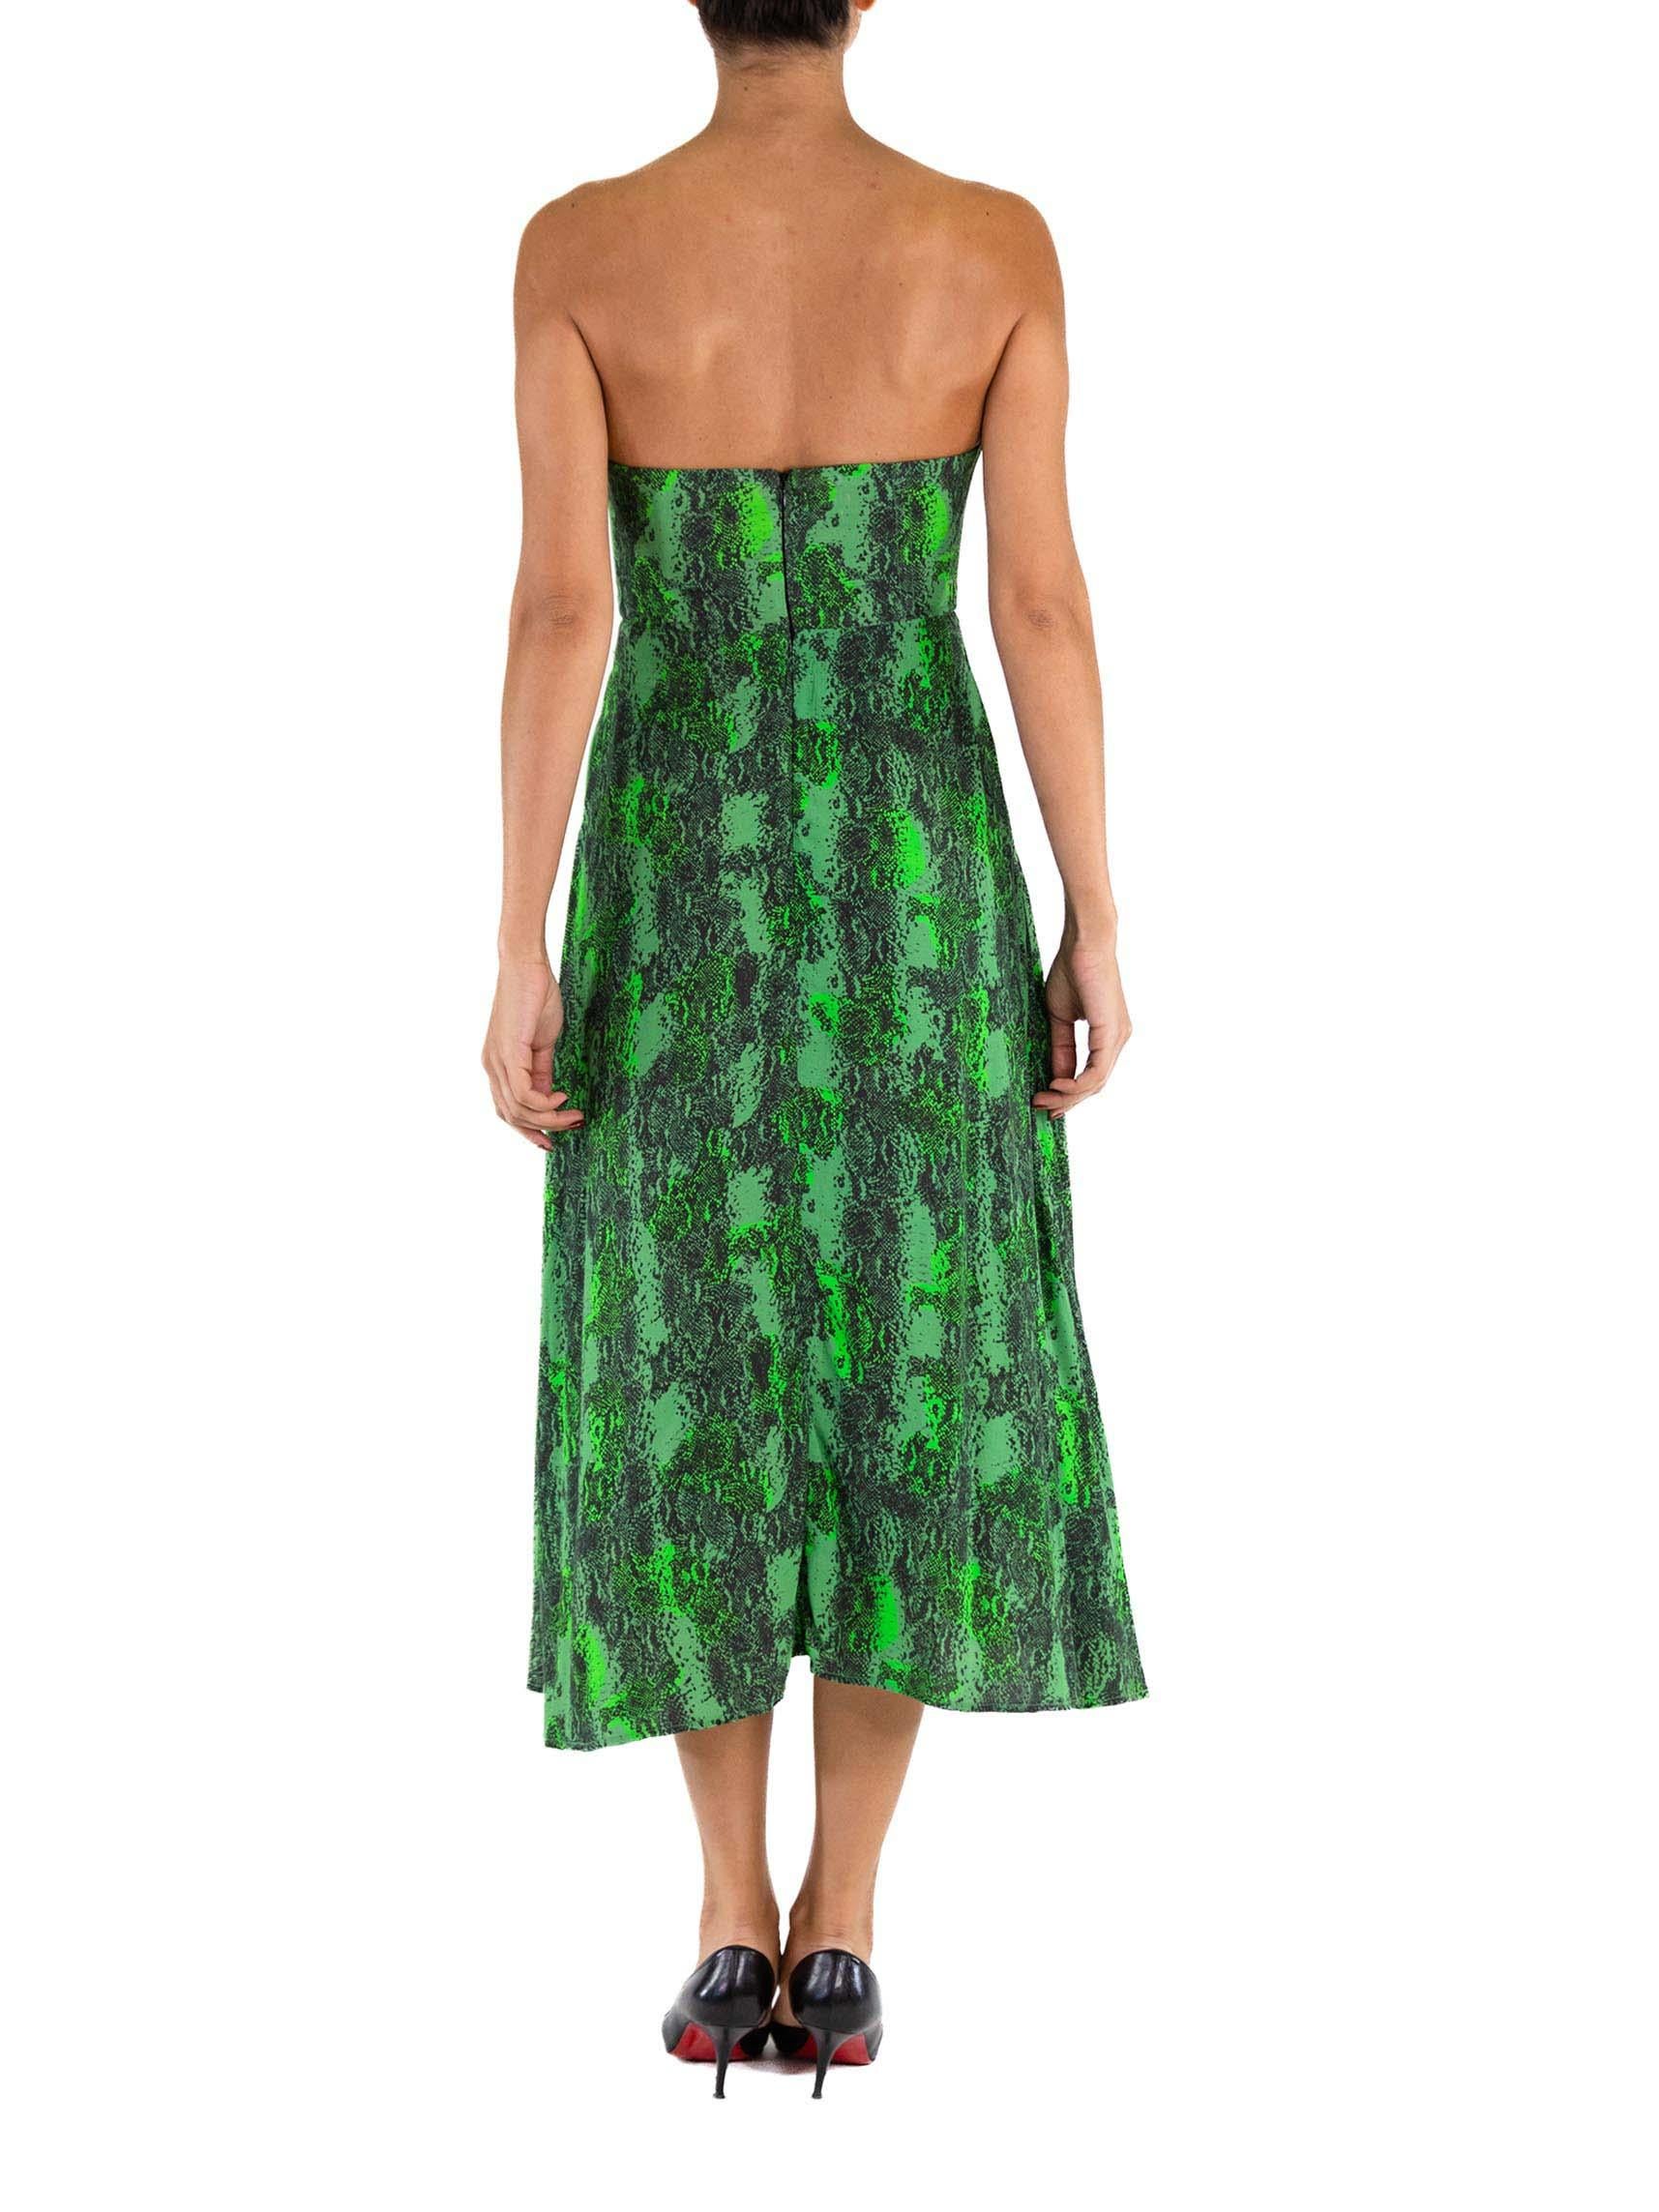 1990S ROTATE Green Rayon  Snake Print Strapless Bustier Dress With Pockets For Sale 2